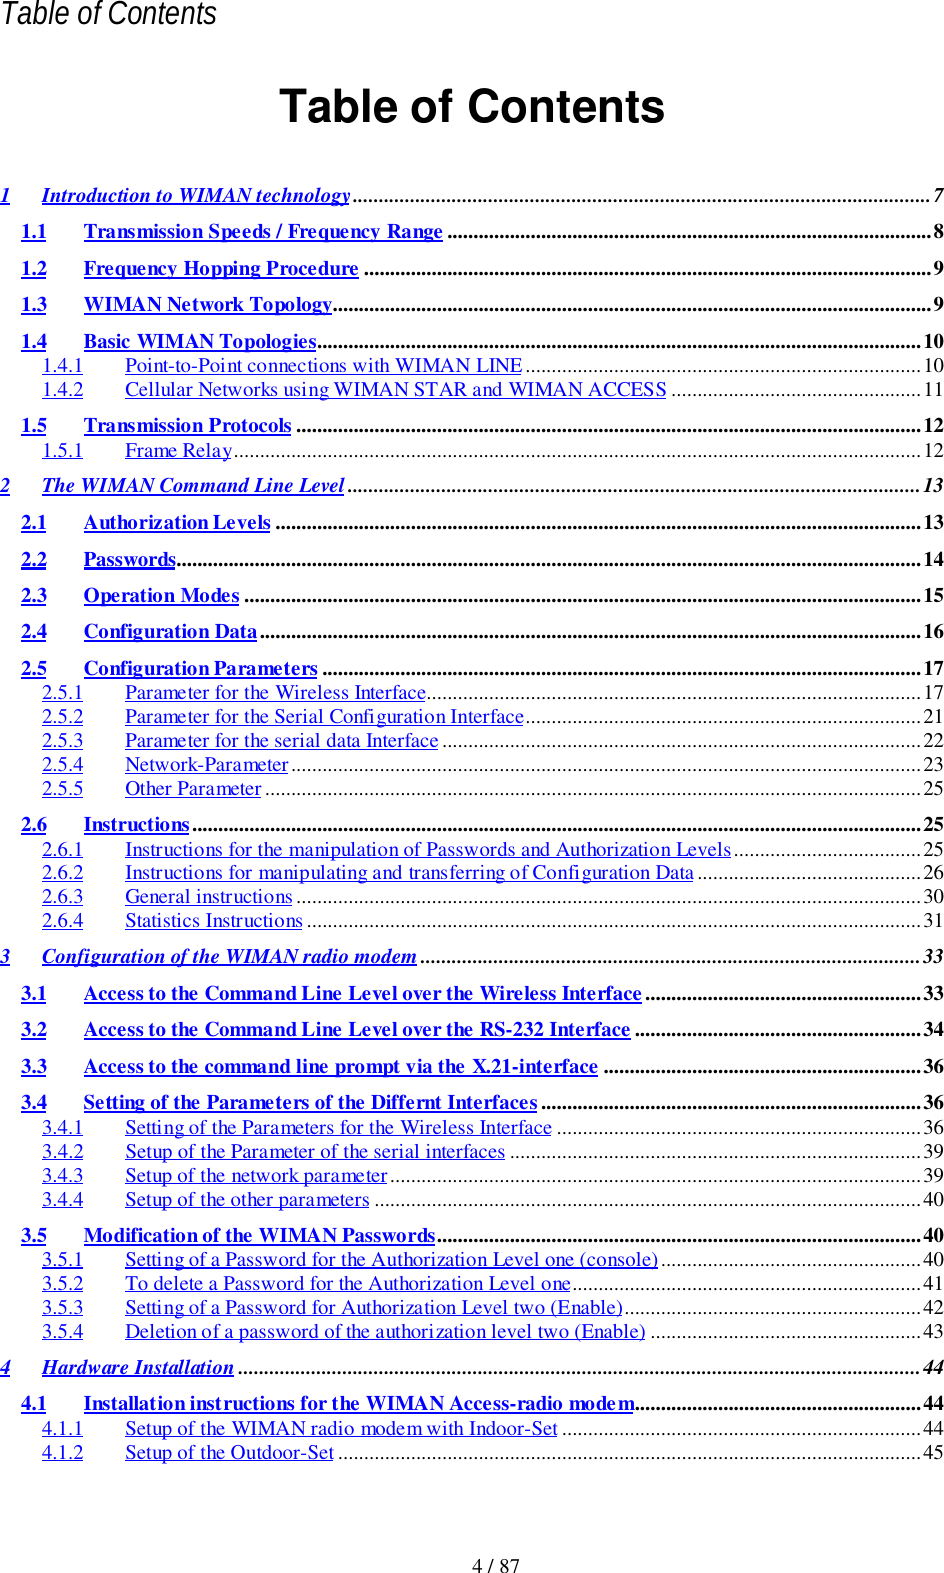 Table of Contents4 / 87Table of Contents1 Introduction to WIMAN technology...............................................................................................................71.1 Transmission Speeds / Frequency Range .............................................................................................81.2 Frequency Hopping Procedure .............................................................................................................91.3 WIMAN Network Topology...................................................................................................................91.4 Basic WIMAN Topologies....................................................................................................................101.4.1 Point-to-Point connections with WIMAN LINE............................................................................101.4.2 Cellular Networks using WIMAN STAR and WIMAN ACCESS ................................................111.5 Transmission Protocols ........................................................................................................................121.5.1 Frame Relay....................................................................................................................................122 The WIMAN Command Line Level ..............................................................................................................132.1 Authorization Levels ............................................................................................................................132.2 Passwords...............................................................................................................................................142.3 Operation Modes ..................................................................................................................................152.4 Configuration Data...............................................................................................................................162.5 Configuration Parameters ...................................................................................................................172.5.1 Parameter for the Wireless Interface...............................................................................................172.5.2 Parameter for the Serial Configuration Interface............................................................................212.5.3 Parameter for the serial data Interface ............................................................................................222.5.4 Network-Parameter.........................................................................................................................232.5.5 Other Parameter..............................................................................................................................252.6 Instructions............................................................................................................................................252.6.1 Instructions for the manipulation of Passwords and Authorization Levels....................................252.6.2 Instructions for manipulating and transferring of Configuration Data...........................................262.6.3 General instructions ........................................................................................................................302.6.4 Statistics Instructions ......................................................................................................................313 Configuration of the WIMAN radio modem ................................................................................................333.1 Access to the Command Line Level over the Wireless Interface.....................................................333.2 Access to the Command Line Level over the RS-232 Interface .......................................................343.3 Access to the command line prompt via the X.21-interface .............................................................363.4 Setting of the Parameters of the Differnt Interfaces .........................................................................363.4.1 Setting of the Parameters for the Wireless Interface ......................................................................363.4.2 Setup of the Parameter of the serial interfaces ...............................................................................393.4.3 Setup of the network parameter......................................................................................................393.4.4 Setup of the other parameters .........................................................................................................403.5 Modification of the WIMAN Passwords.............................................................................................403.5.1 Setting of a Password for the Authorization Level one (console)..................................................403.5.2 To delete a Password for the Authorization Level one...................................................................413.5.3 Setting of a Password for Authorization Level two (Enable).........................................................423.5.4 Deletion of a password of the authorization level two (Enable) ....................................................434 Hardware Installation ...................................................................................................................................444.1 Installation instructions for the WIMAN Access-radio modem.......................................................444.1.1 Setup of the WIMAN radio modem with Indoor-Set .....................................................................444.1.2 Setup of the Outdoor-Set ................................................................................................................45